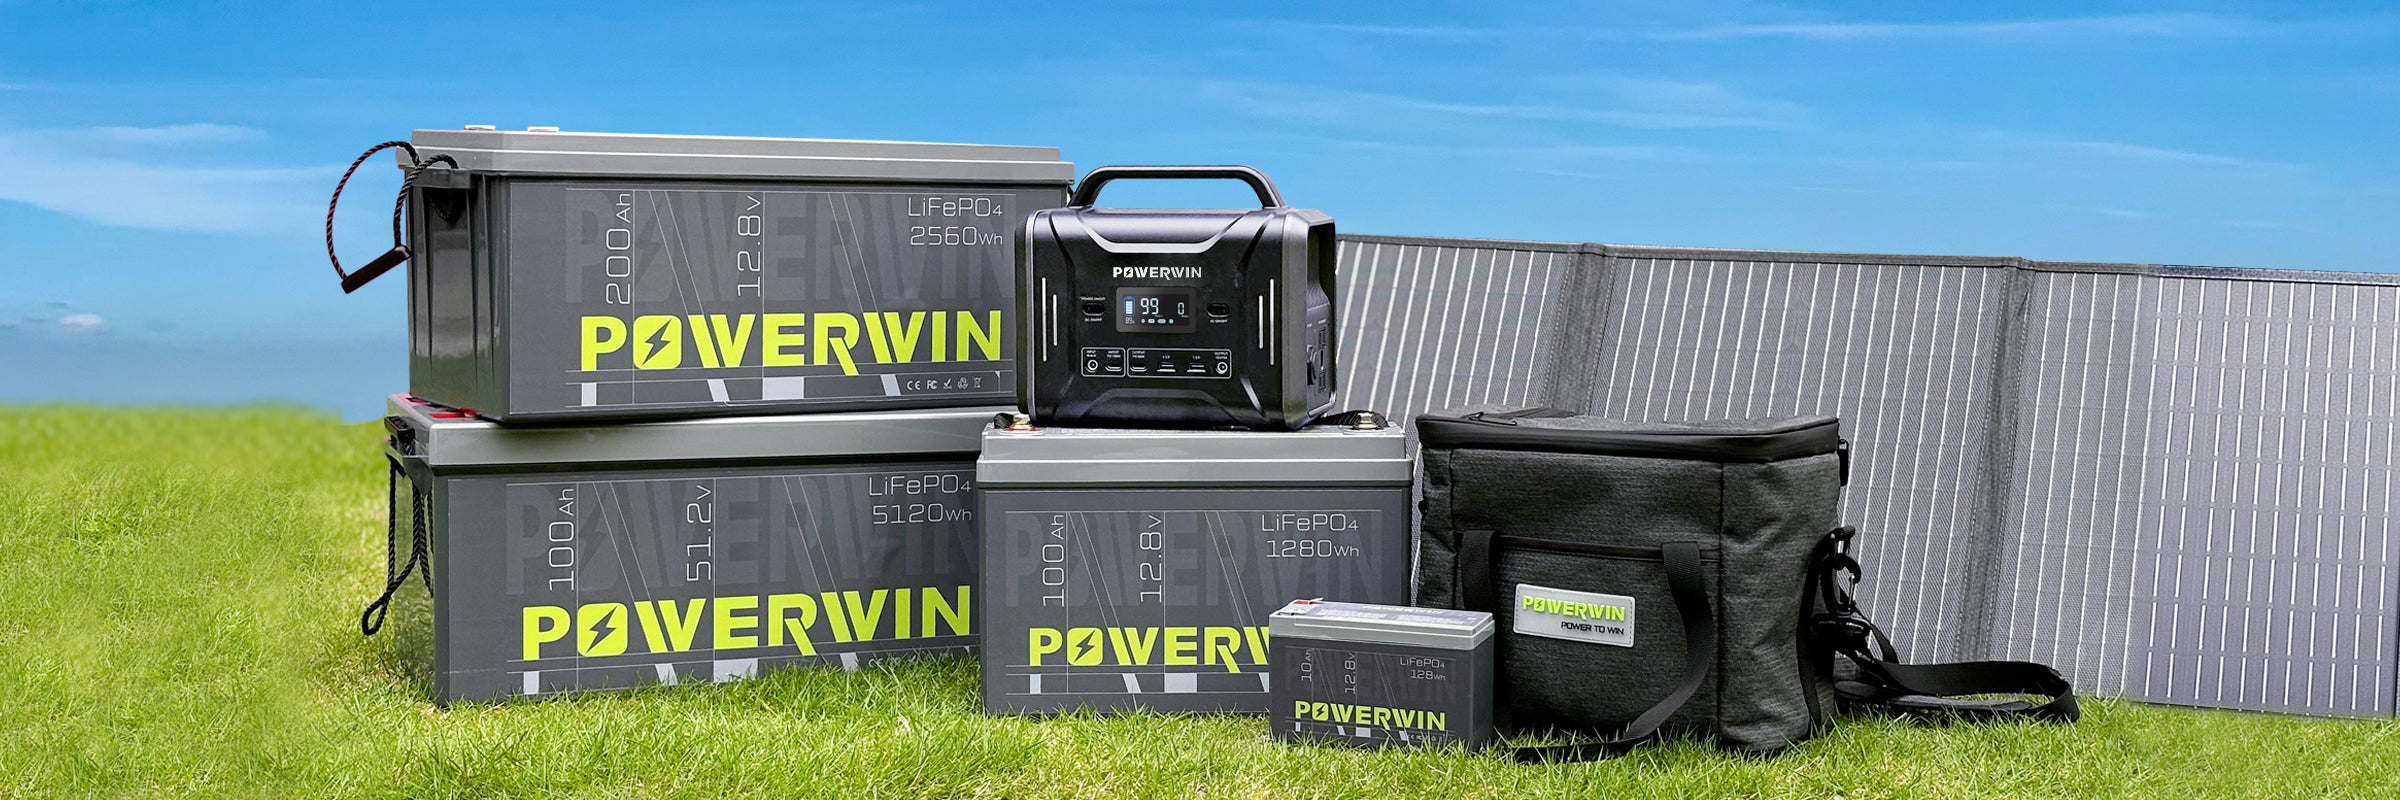 Powerwin BT10 Lifepo4 batteries customers review